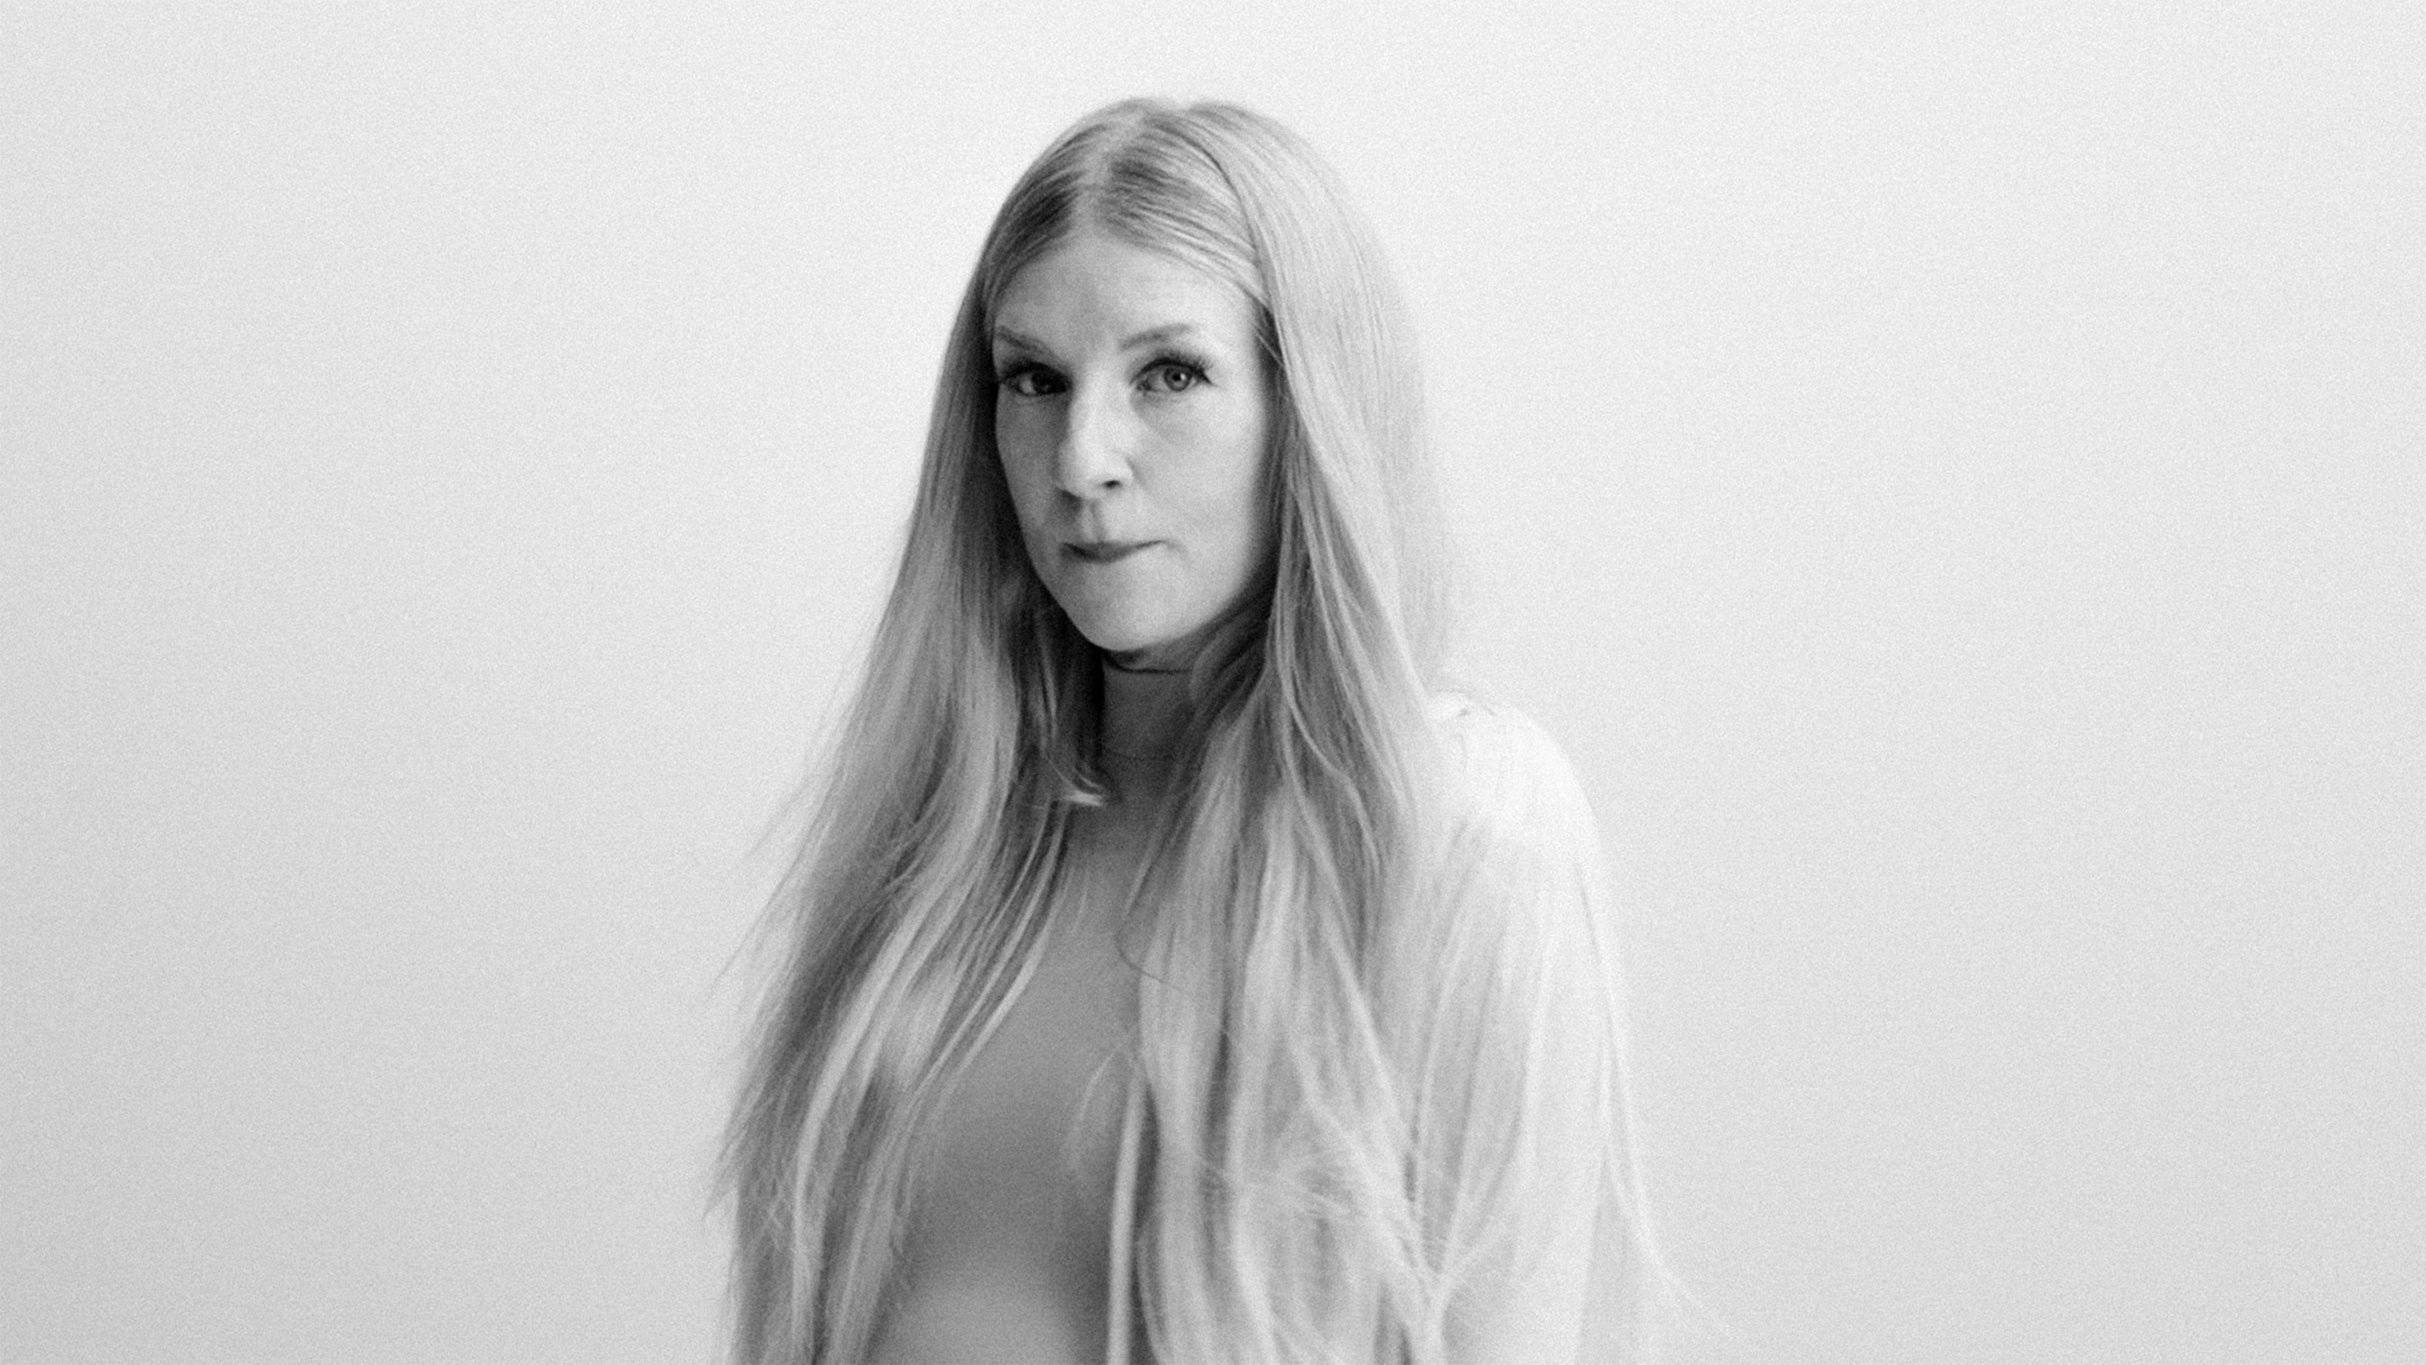 ionnalee | iamamiwhoami - Be Here Soon World Tour presale code for early tickets in Philadelphia